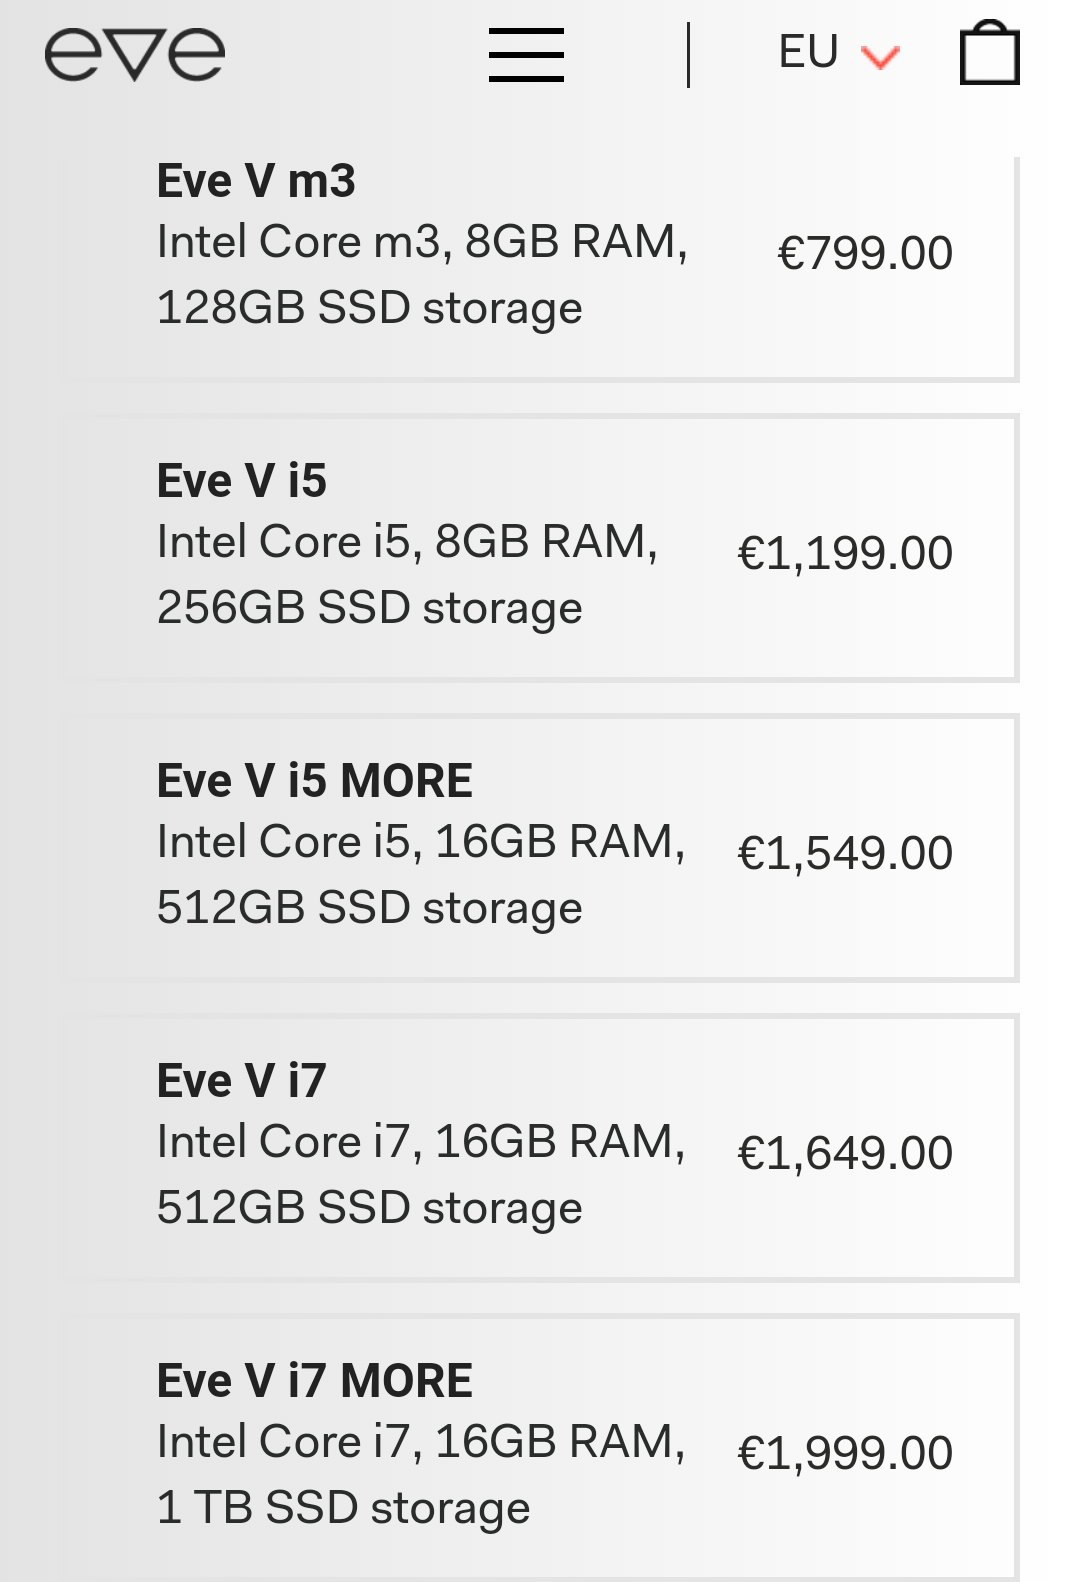 Eve Tech announces the retail price for Eve V 2 in 1